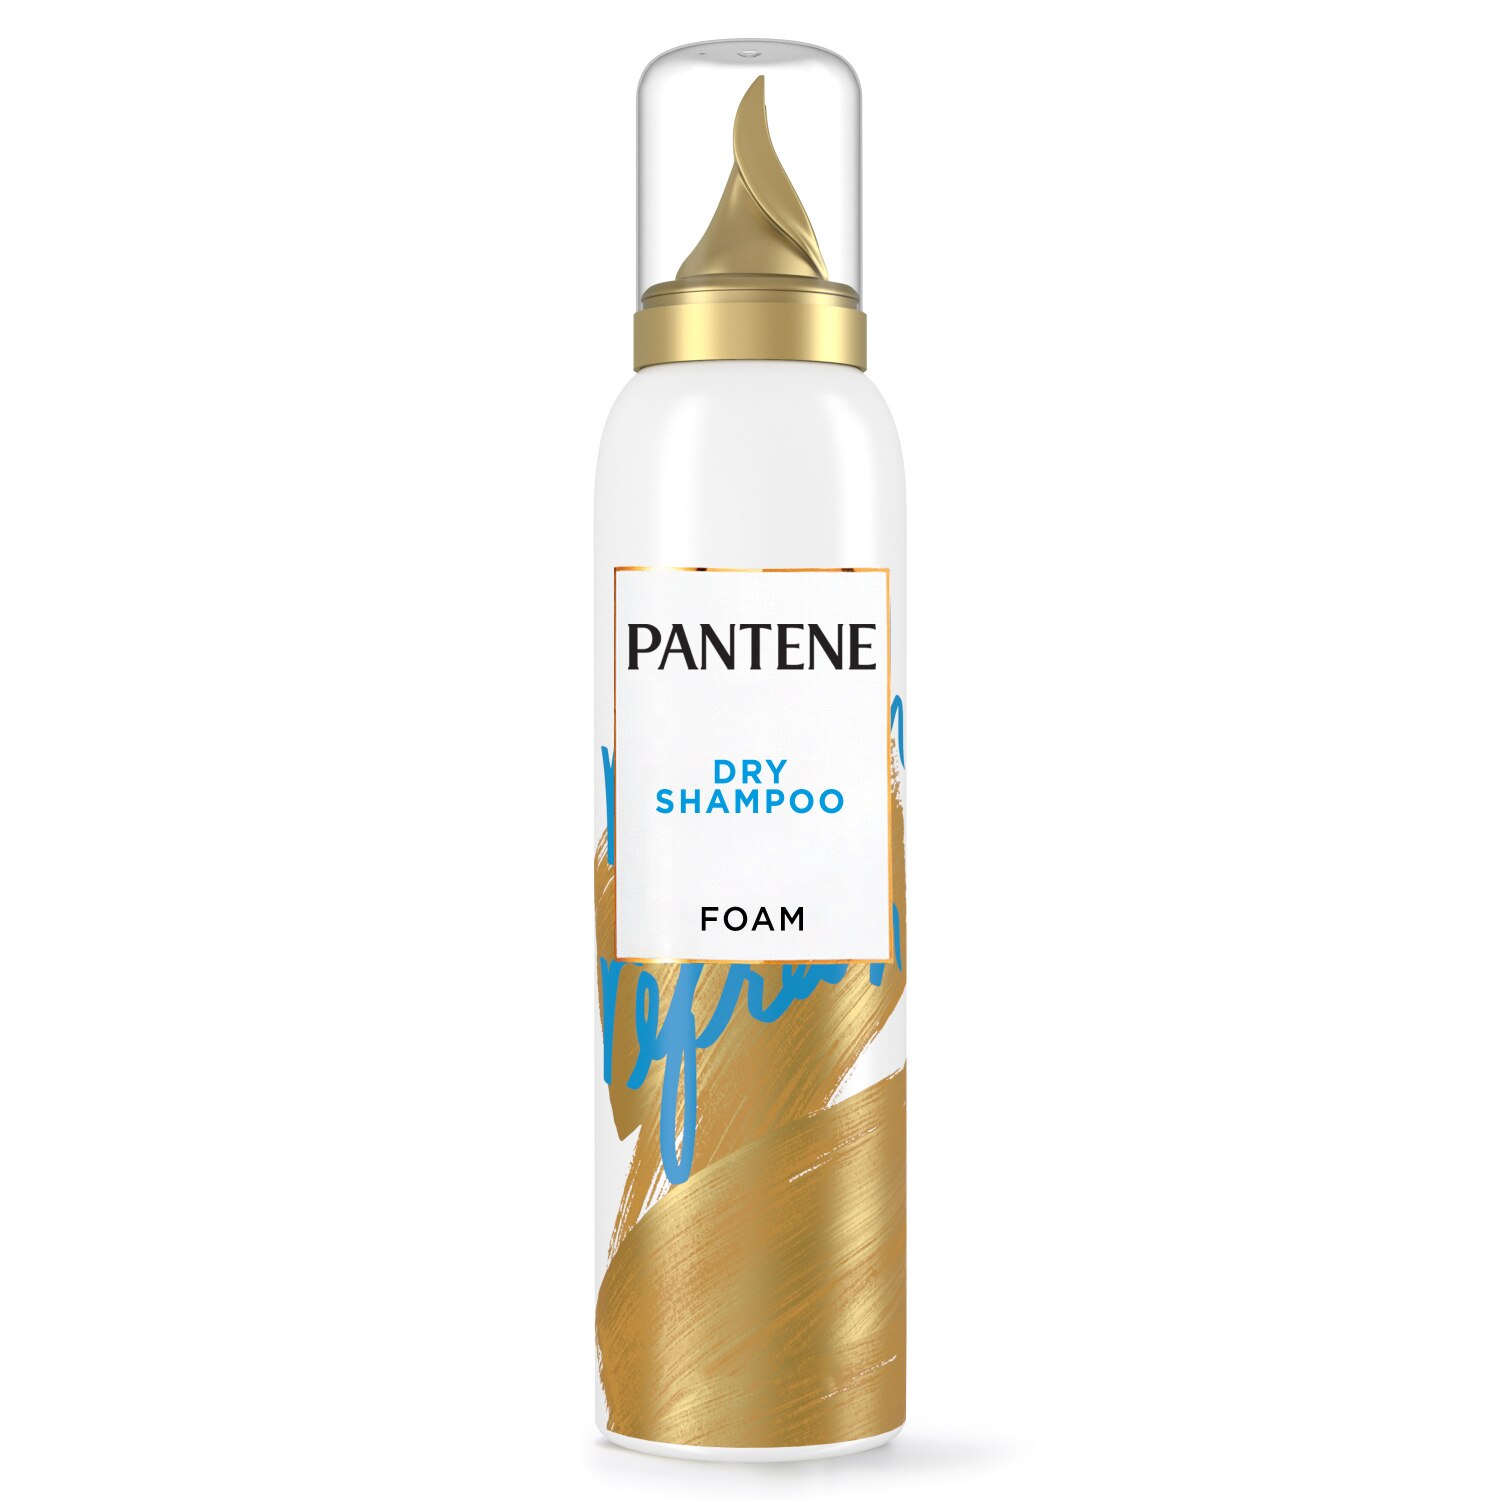 Pantene Pro-V Dry Shampoo Foam, for Thick, Curly, Textured Hair, 5.9 OZ